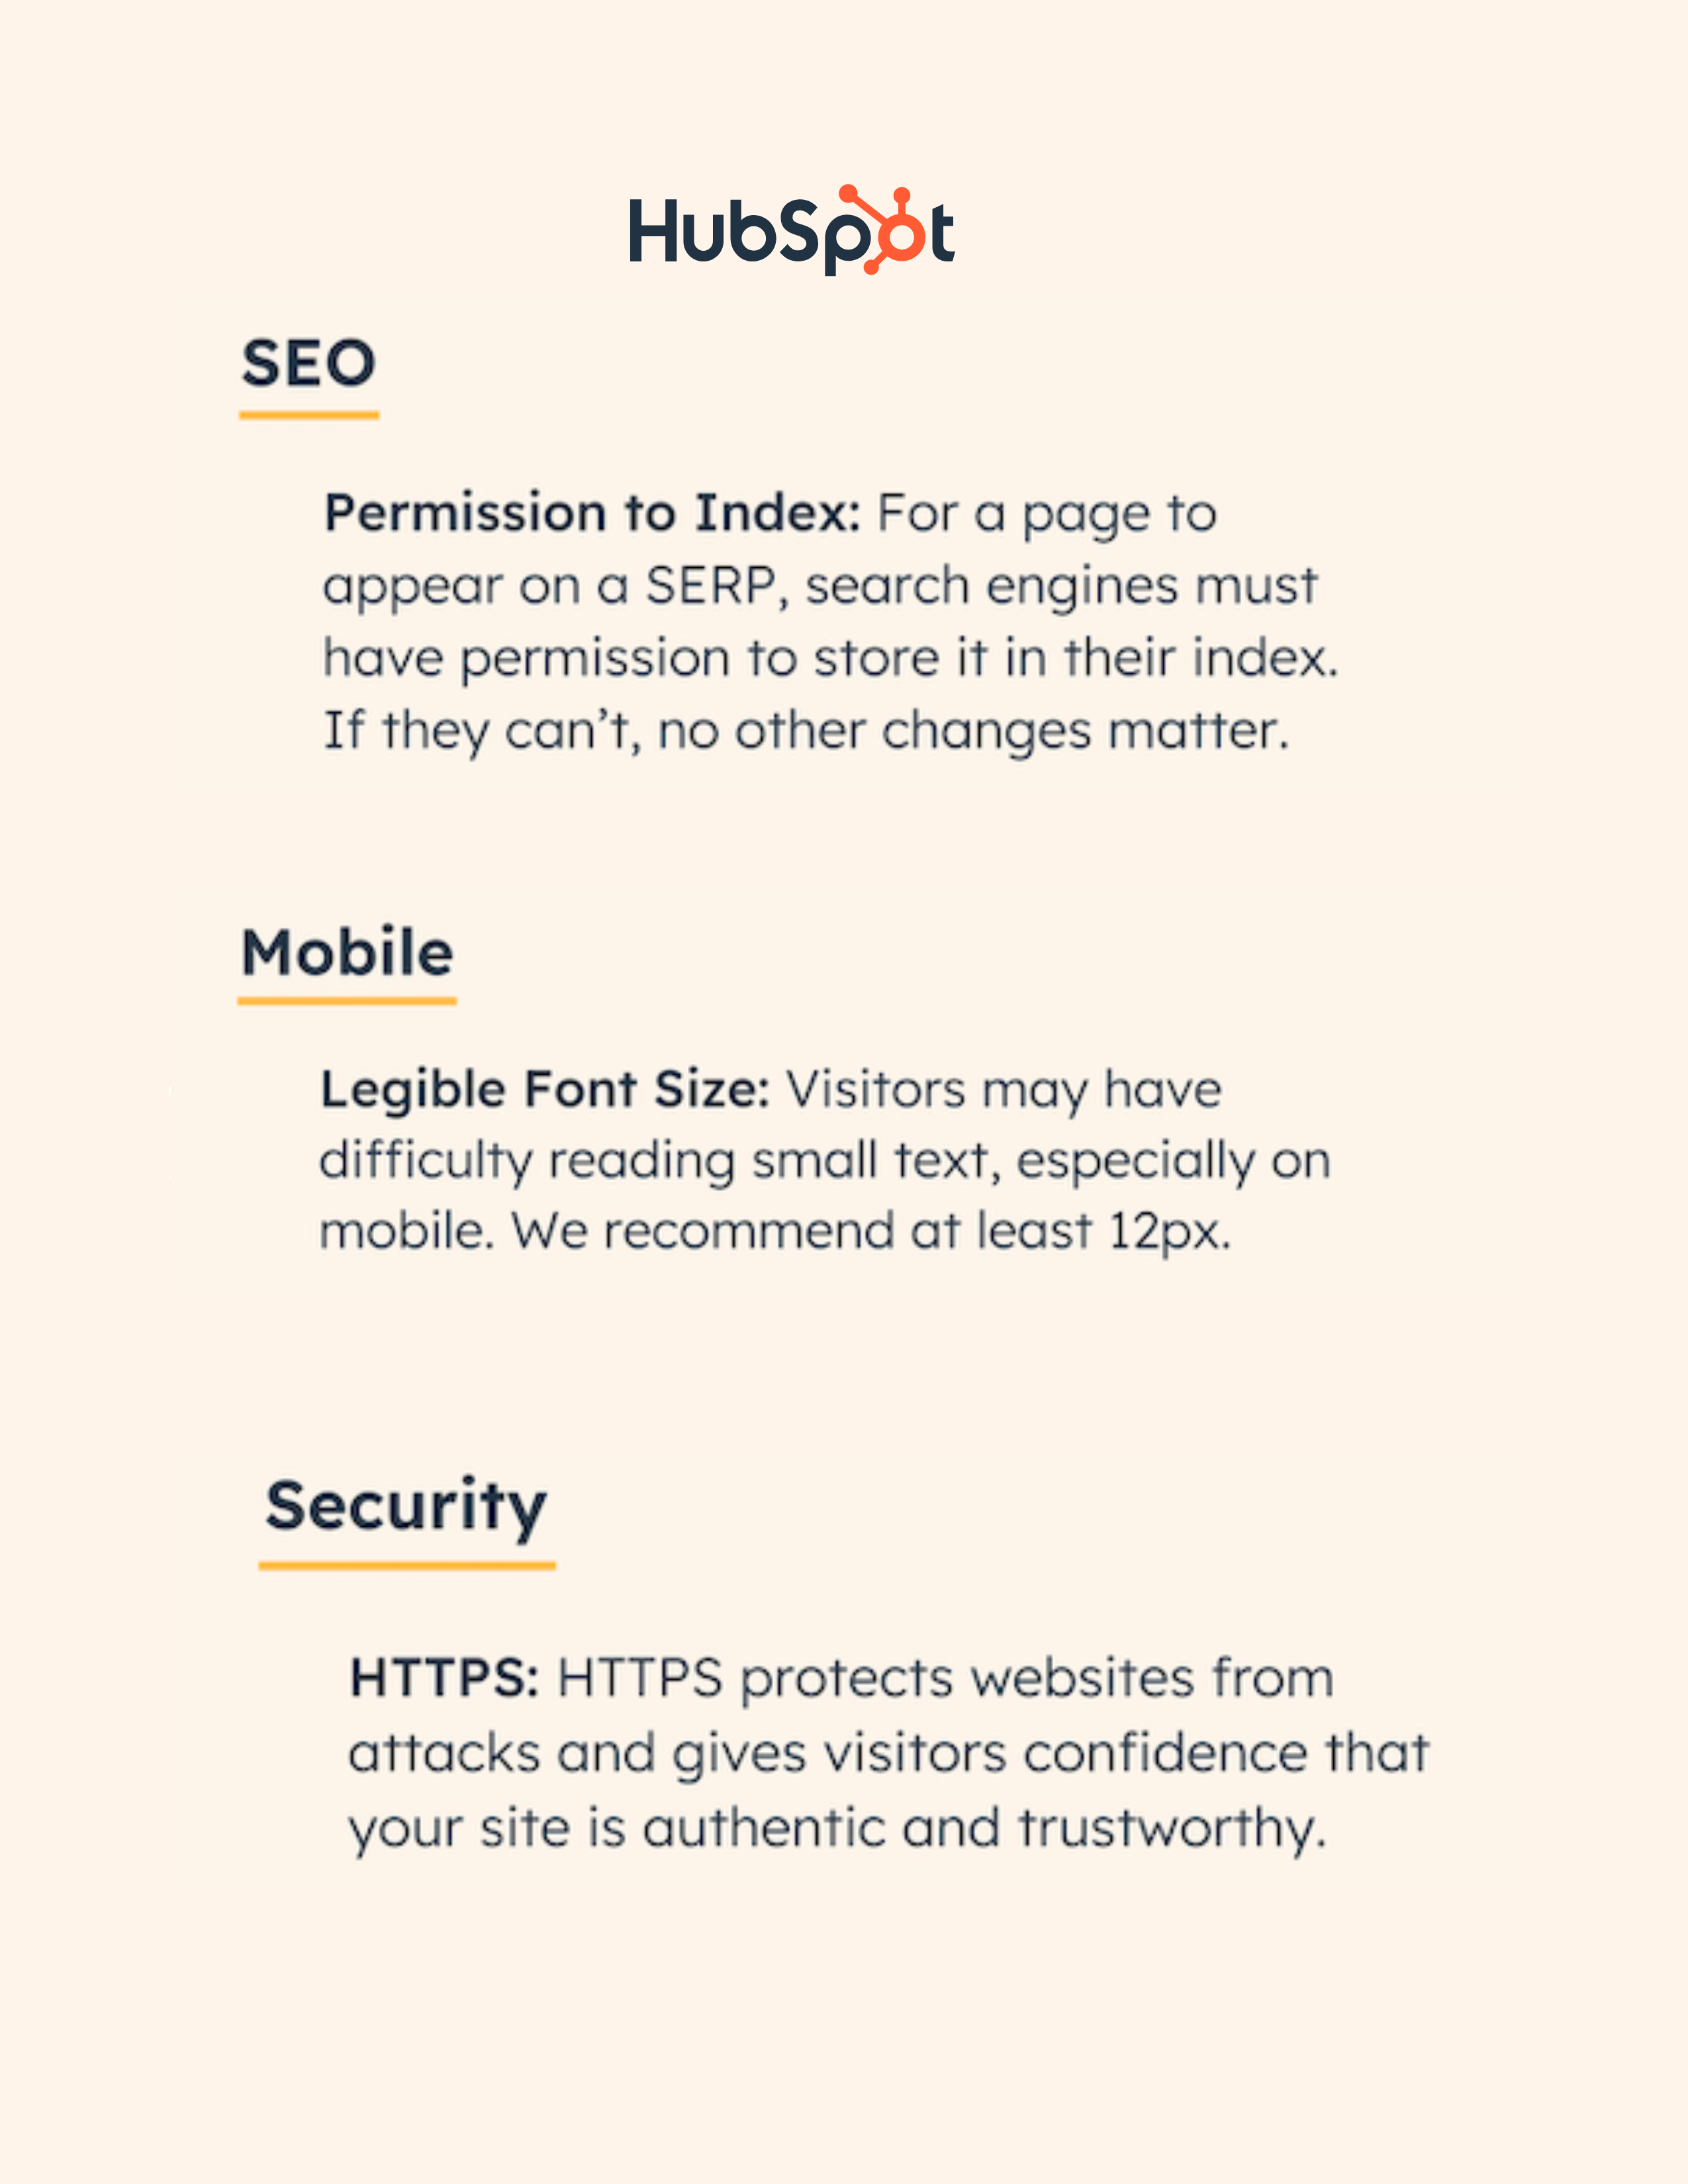 SEO-Mobile-Security-content-snippets